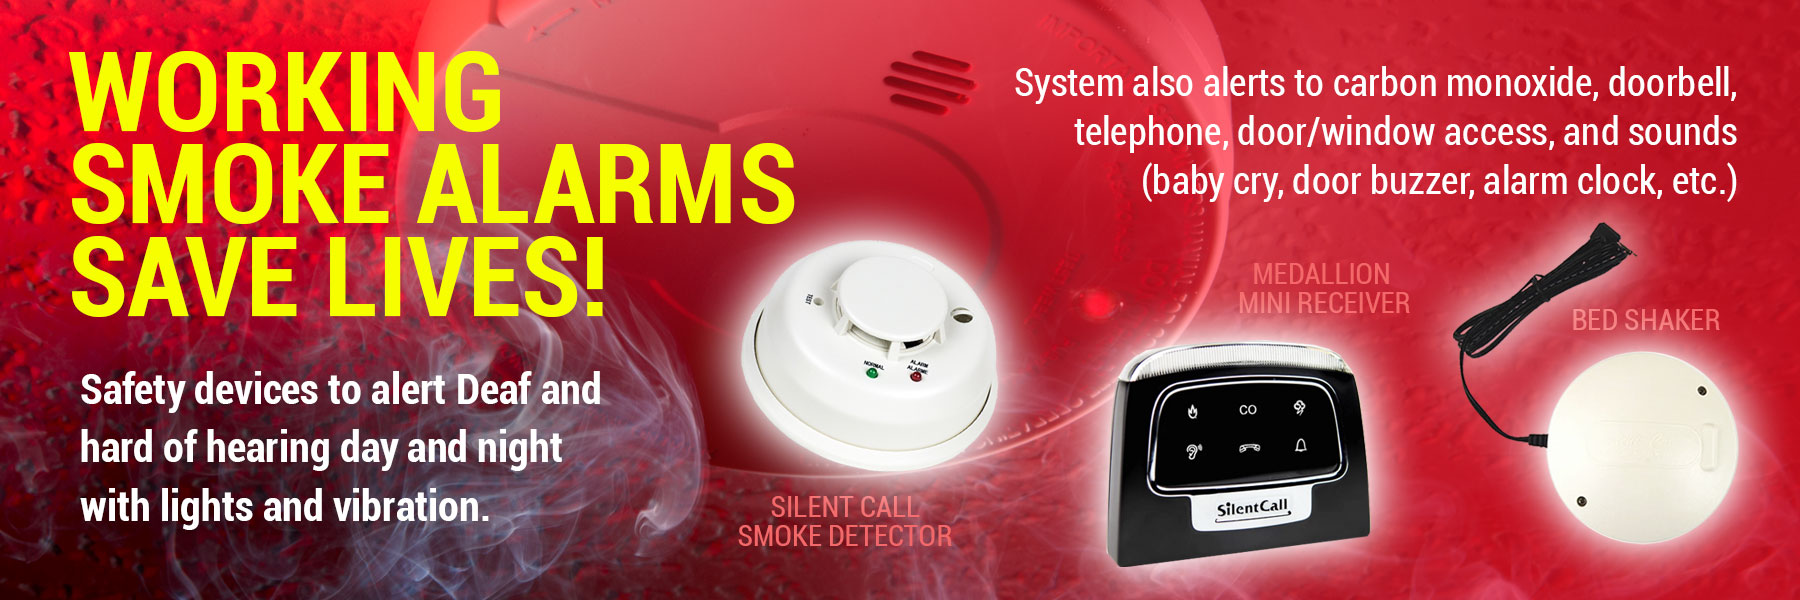 Working Smoke Alarms Save Lives! Assistive signaling devices that flash and vibrate alert the Deaf and hard of hearing to smoke detector and other emergencies in the home. Click anywhere in the photo to got to the safety page. 